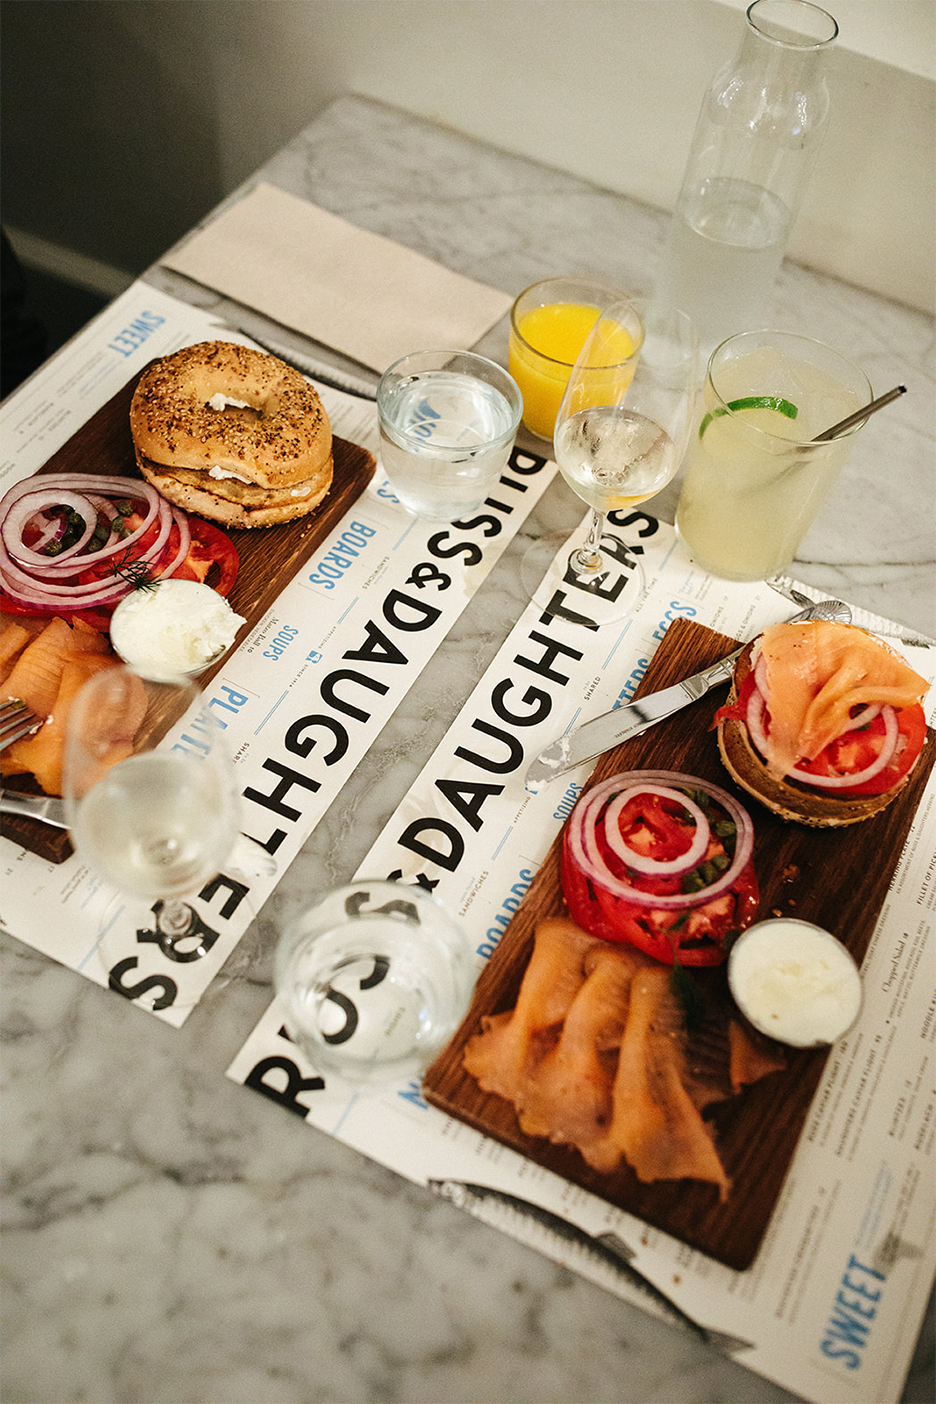 Russ and Daughters spread